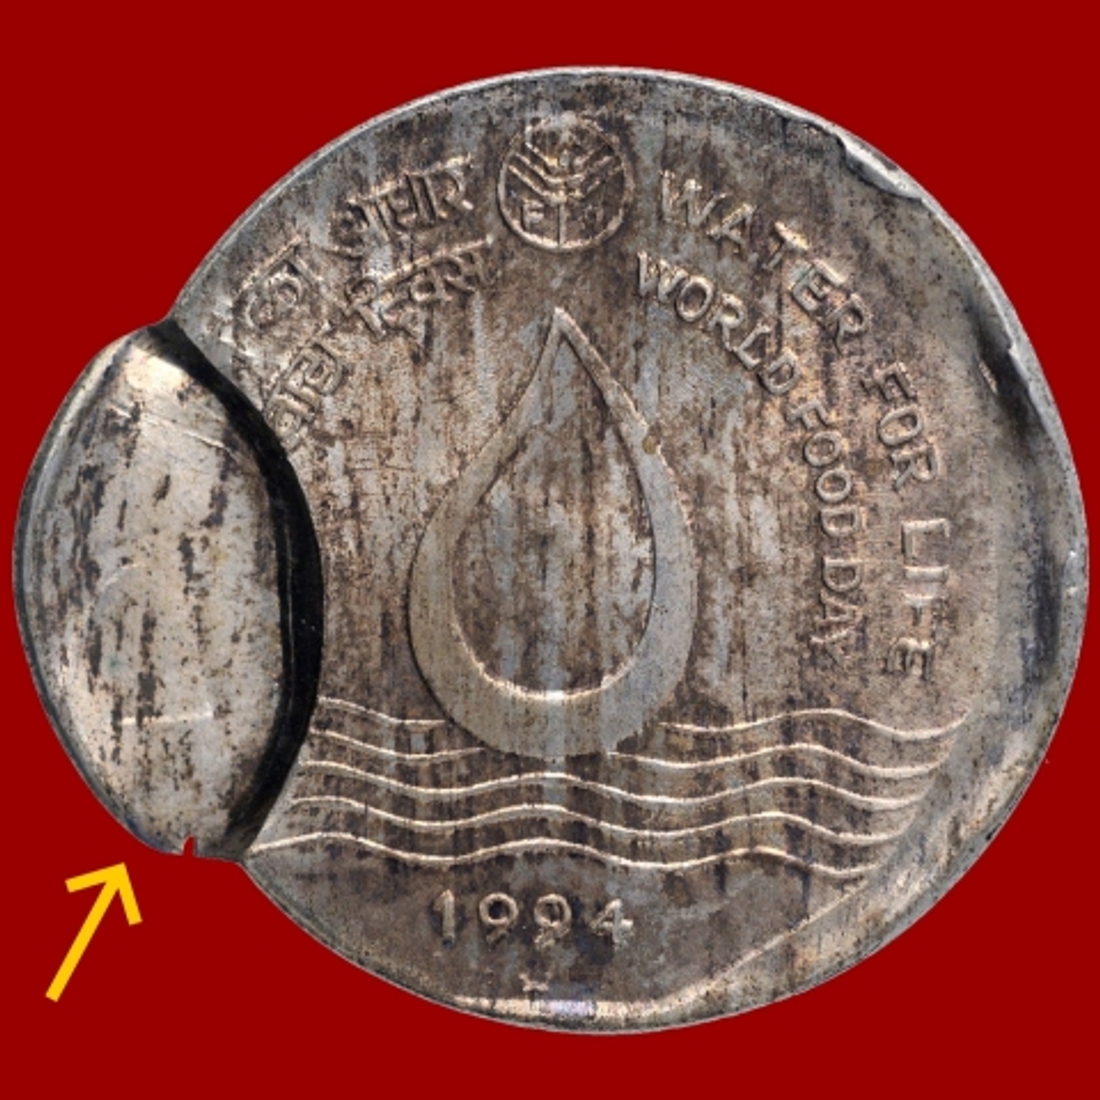 Error Two Rupees Coin of Water For Life World Food Day of Republic India of 1994.